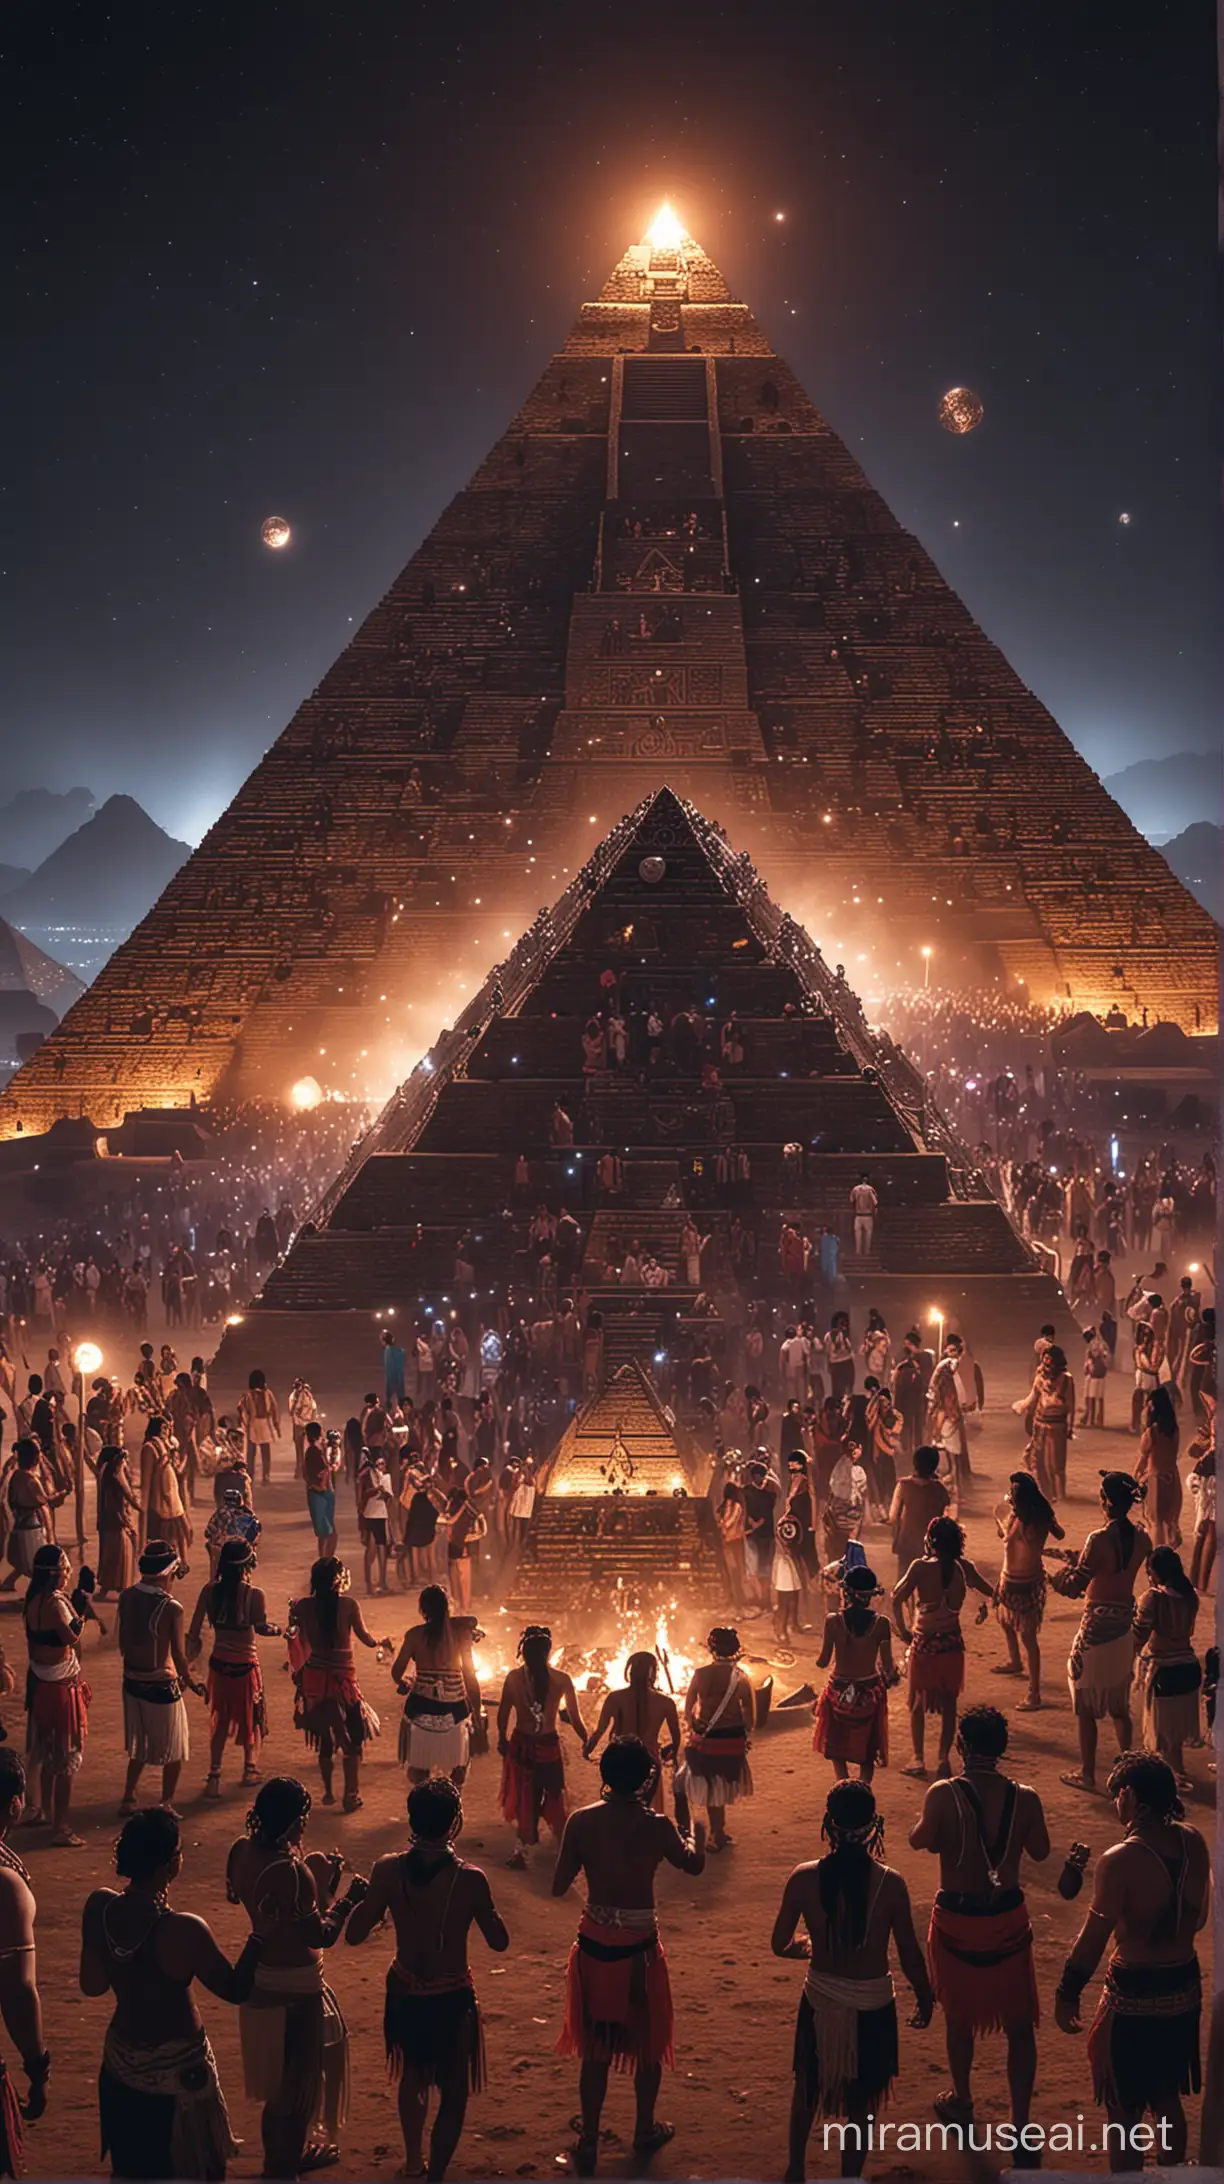 aztec people dancing and having a techno rave party at night, disco balls are flashing, there is a dj in the middle and an aztec pyramid can be seen far away